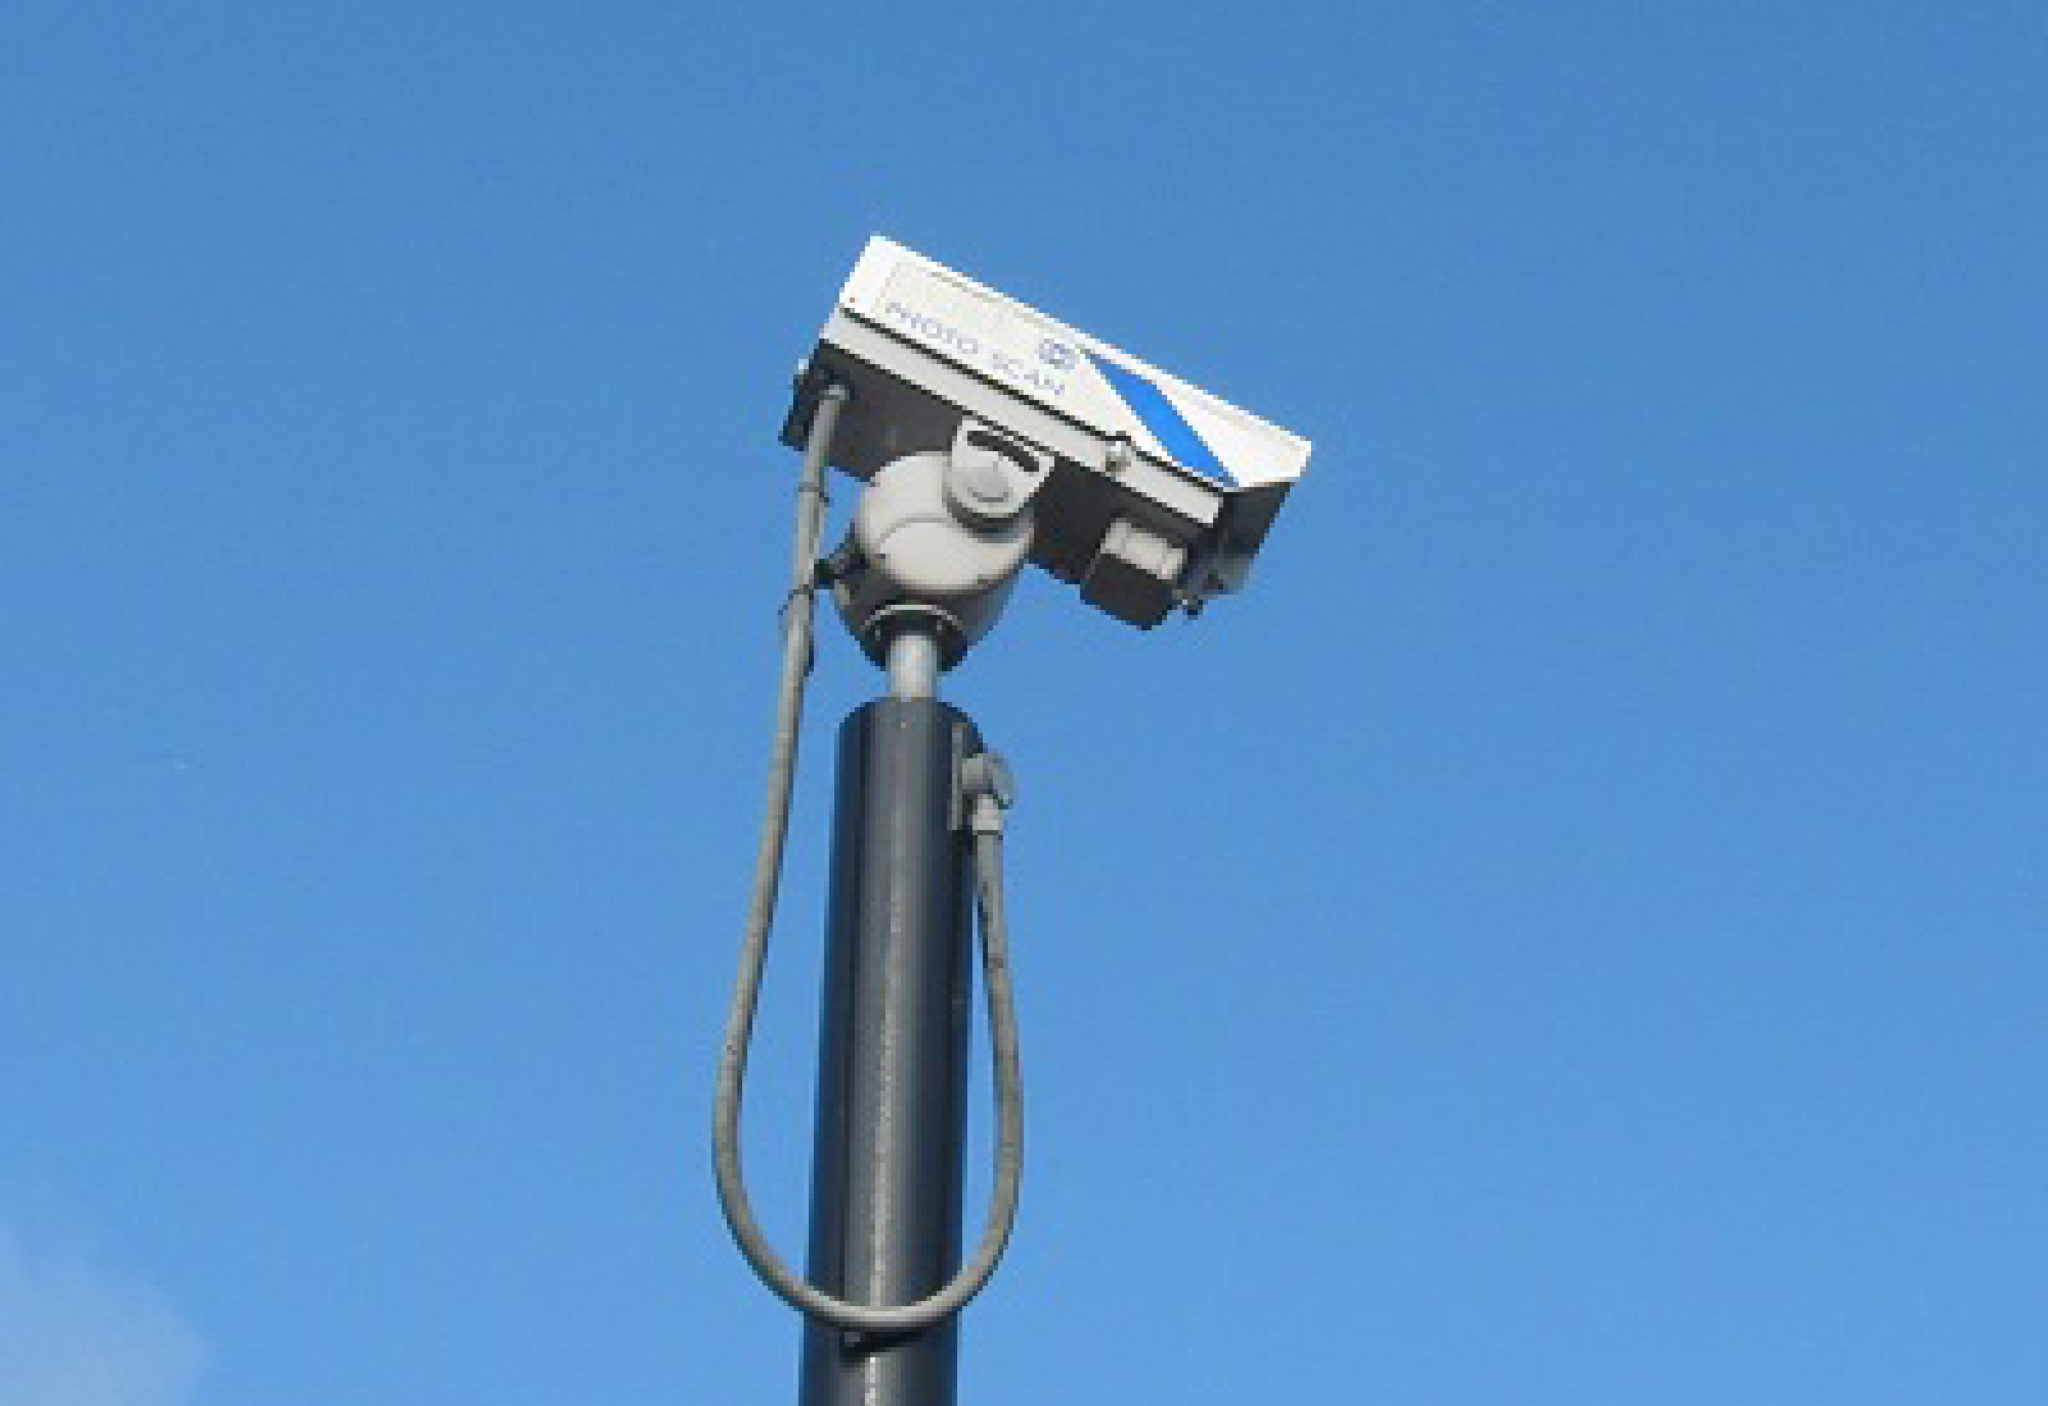 thanet district council, kent, city, council, uk, cctv, cctv monitoring, public space, welfare, security, security systems, control room, security design